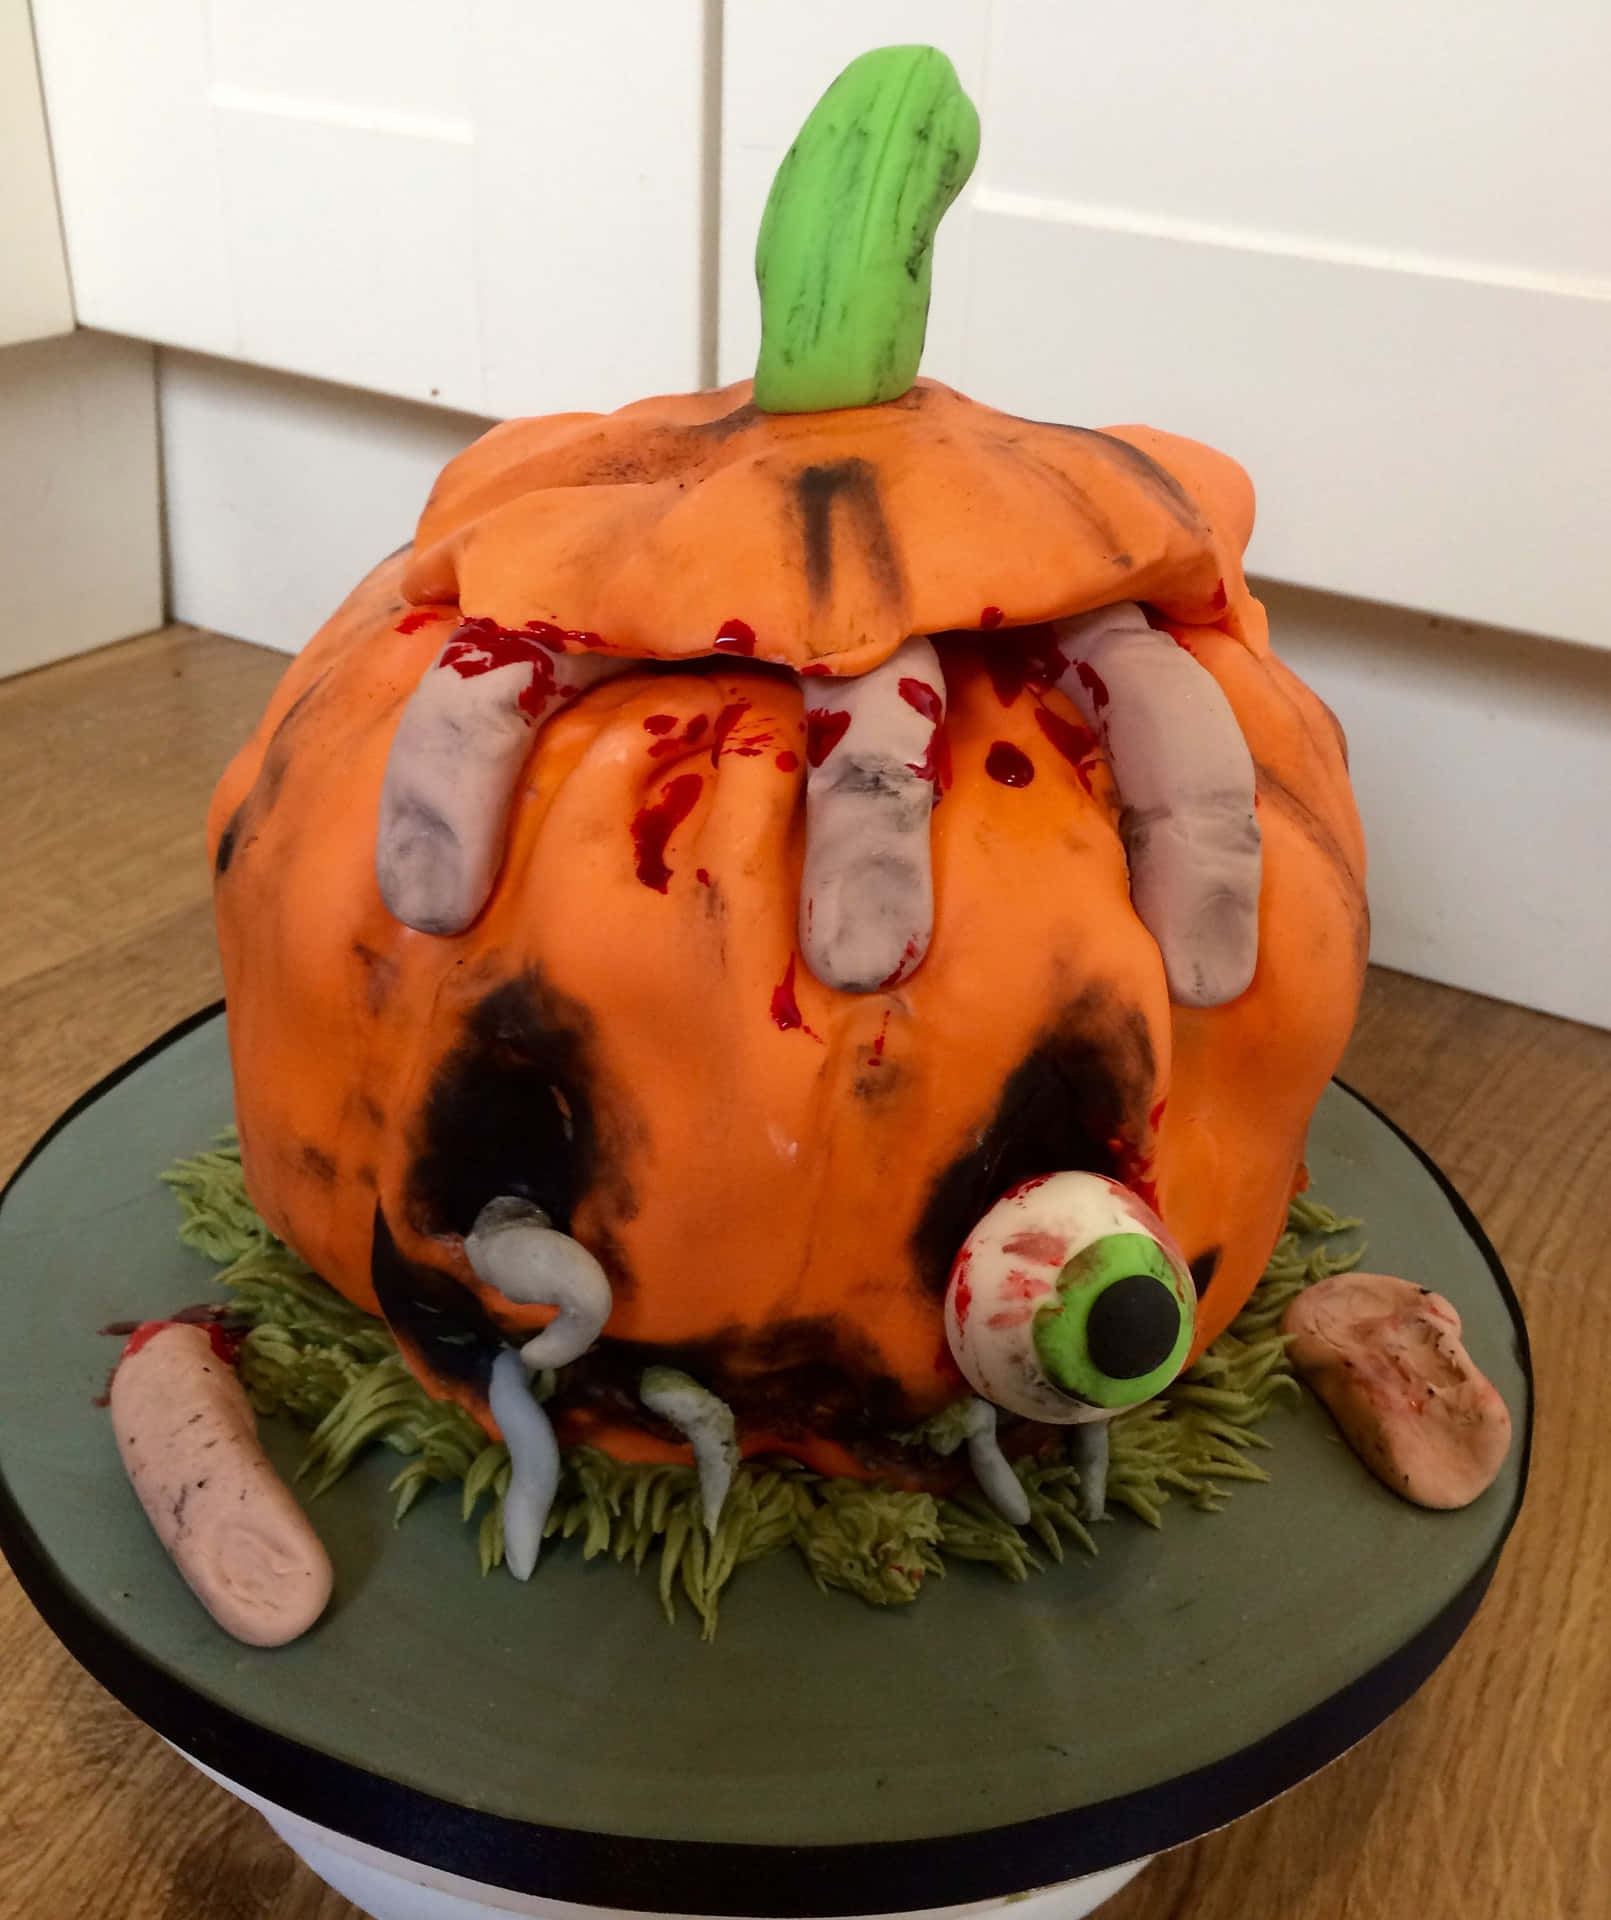 Pumpkin Ugly Cake Picture